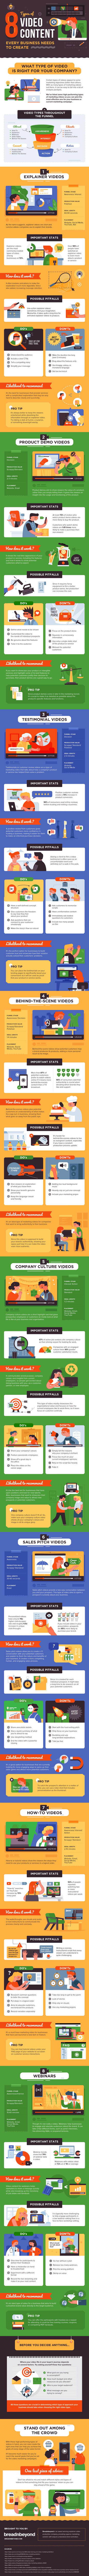 Types of Video Content Infographic